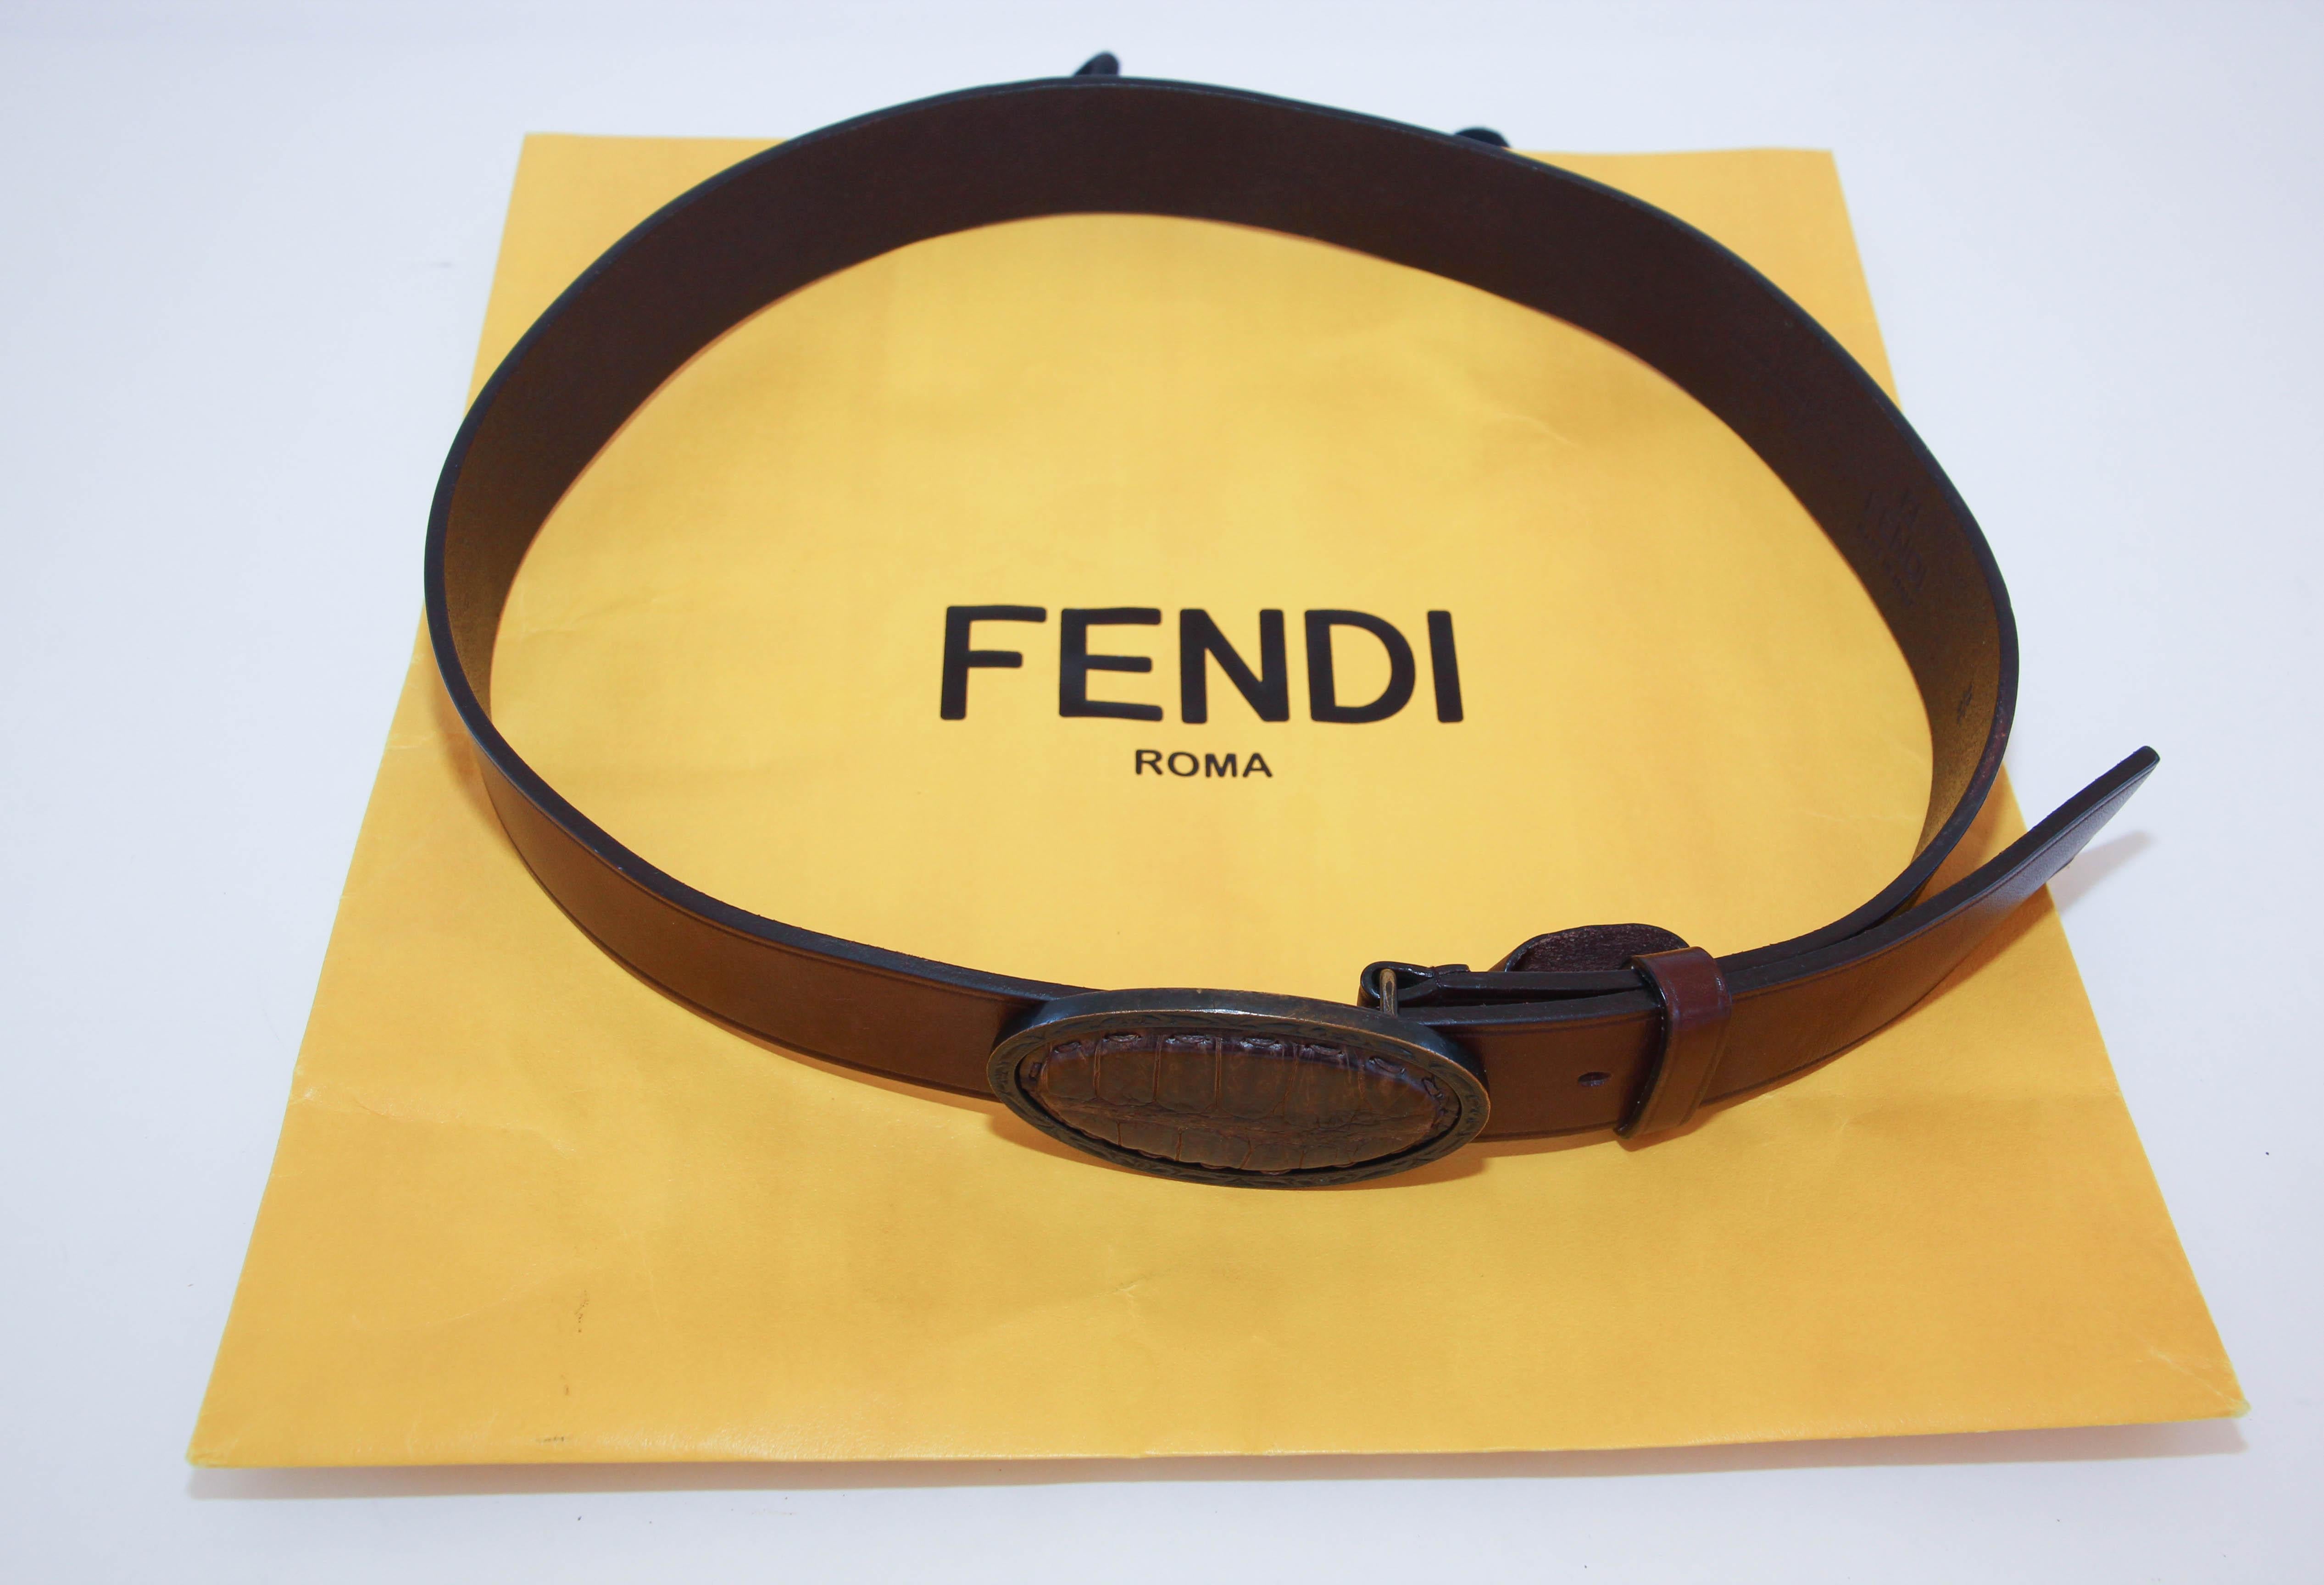 FENDI Crocodile Moca Brown leather Cowboy Belt.
Belt in genuine leather made in Italy with an oval shape belt  antiqued brass buckle with crocodile leather inset in center.
 Dress up or dress down, this leather belt can be worn for any occasion.